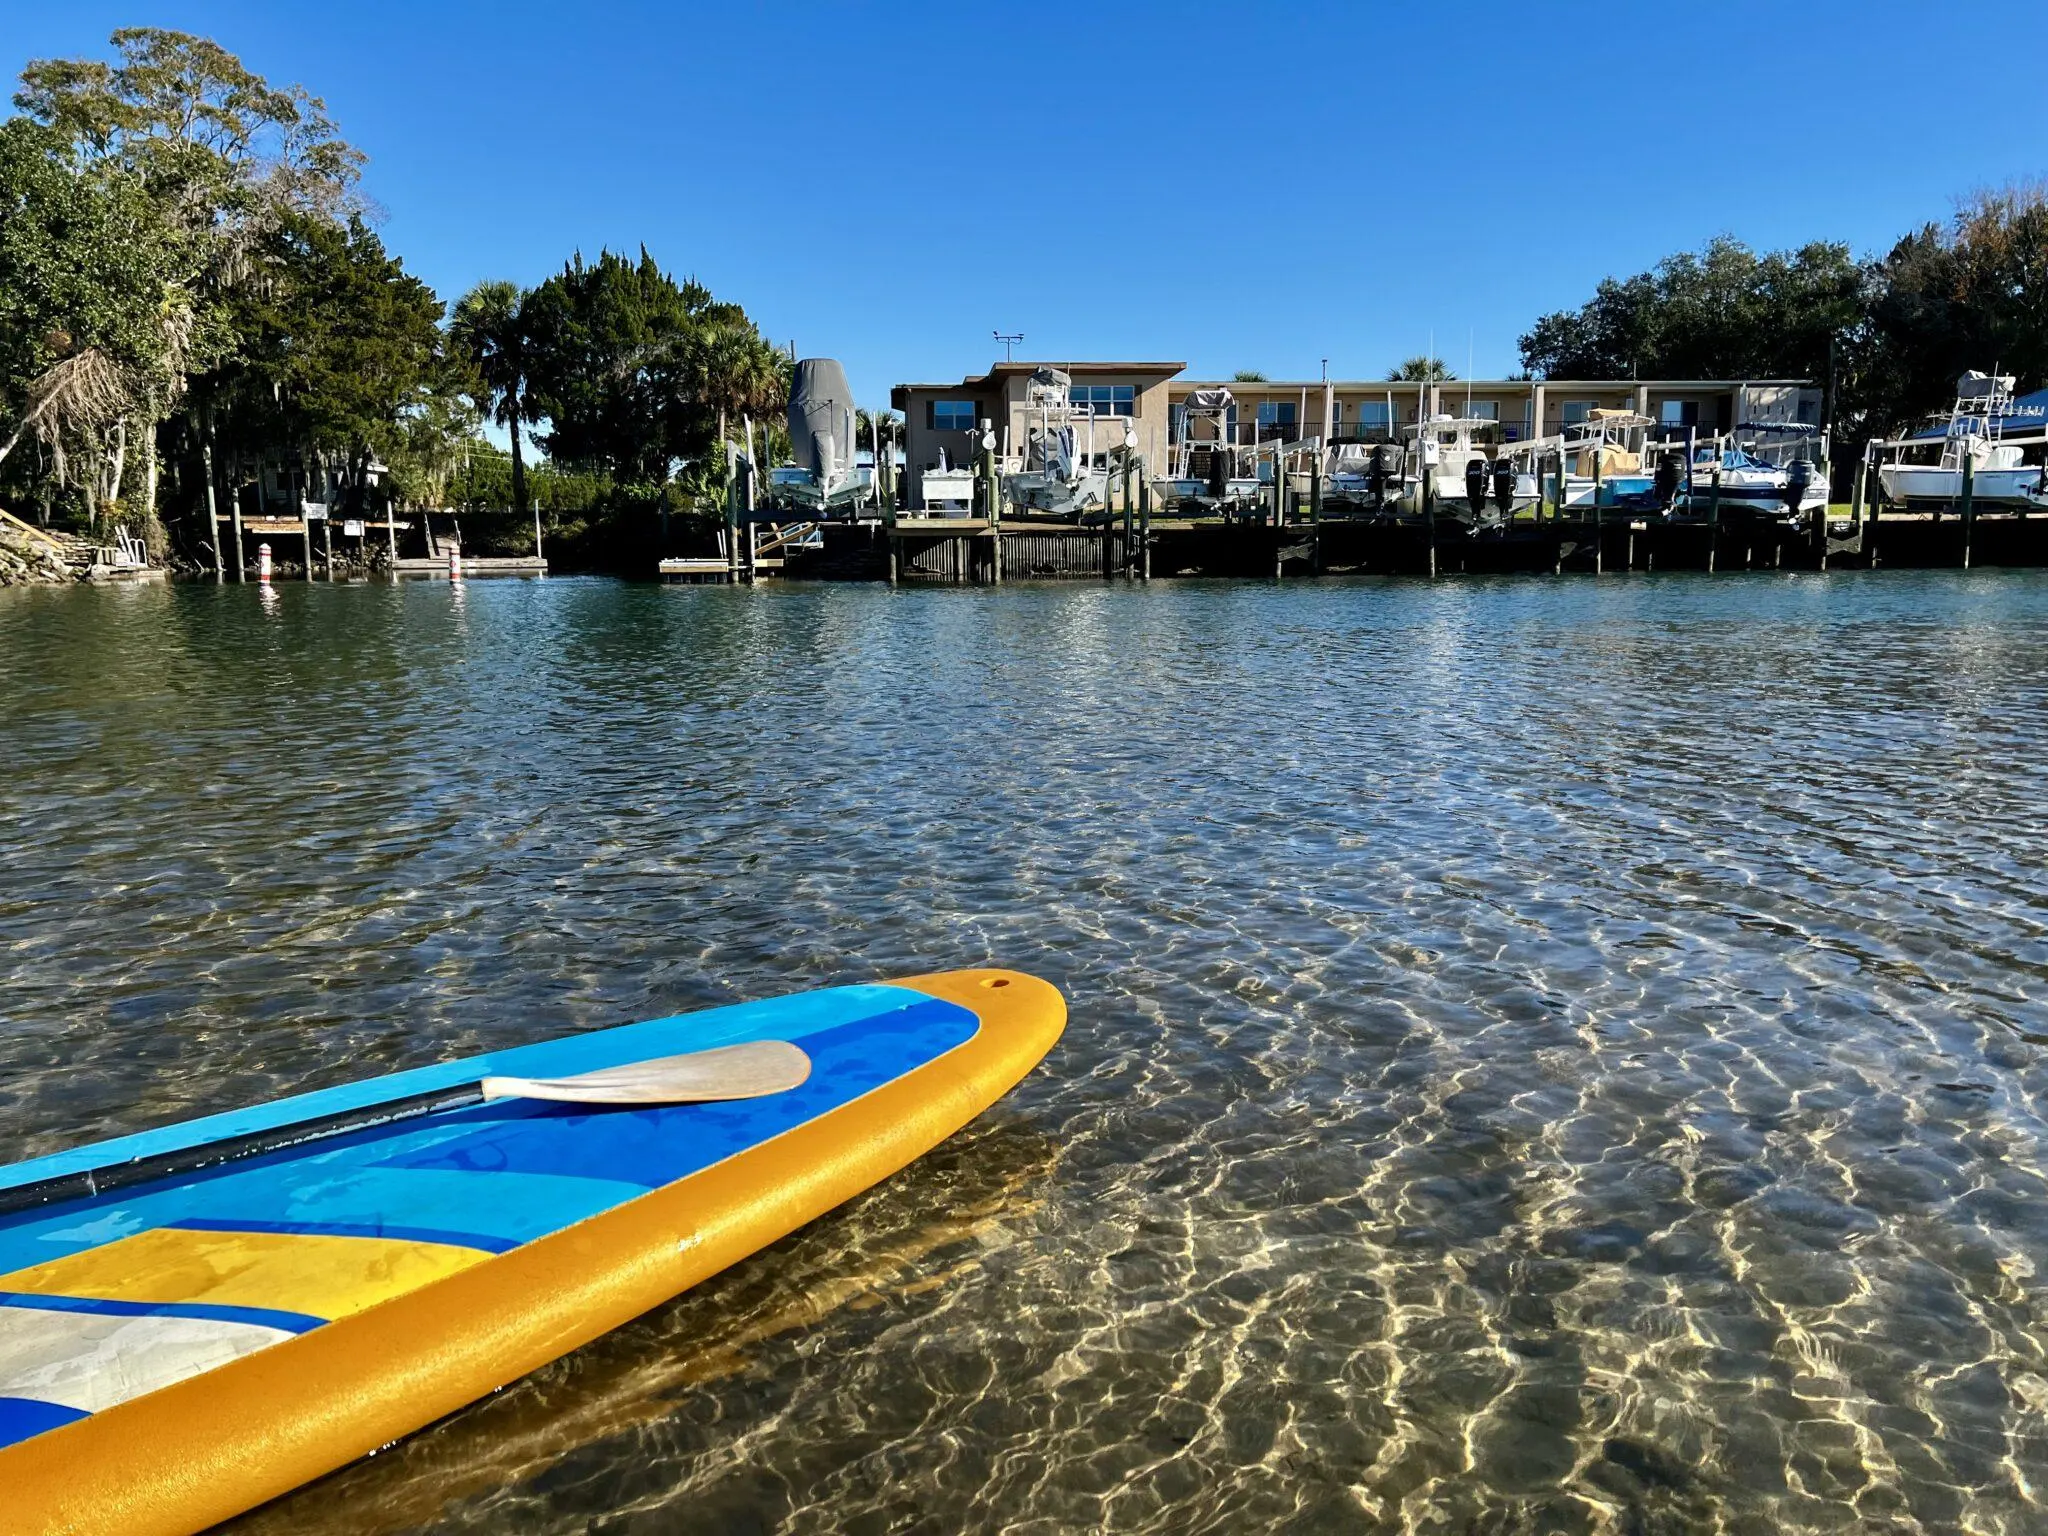 Paddleboard in the water in residential area